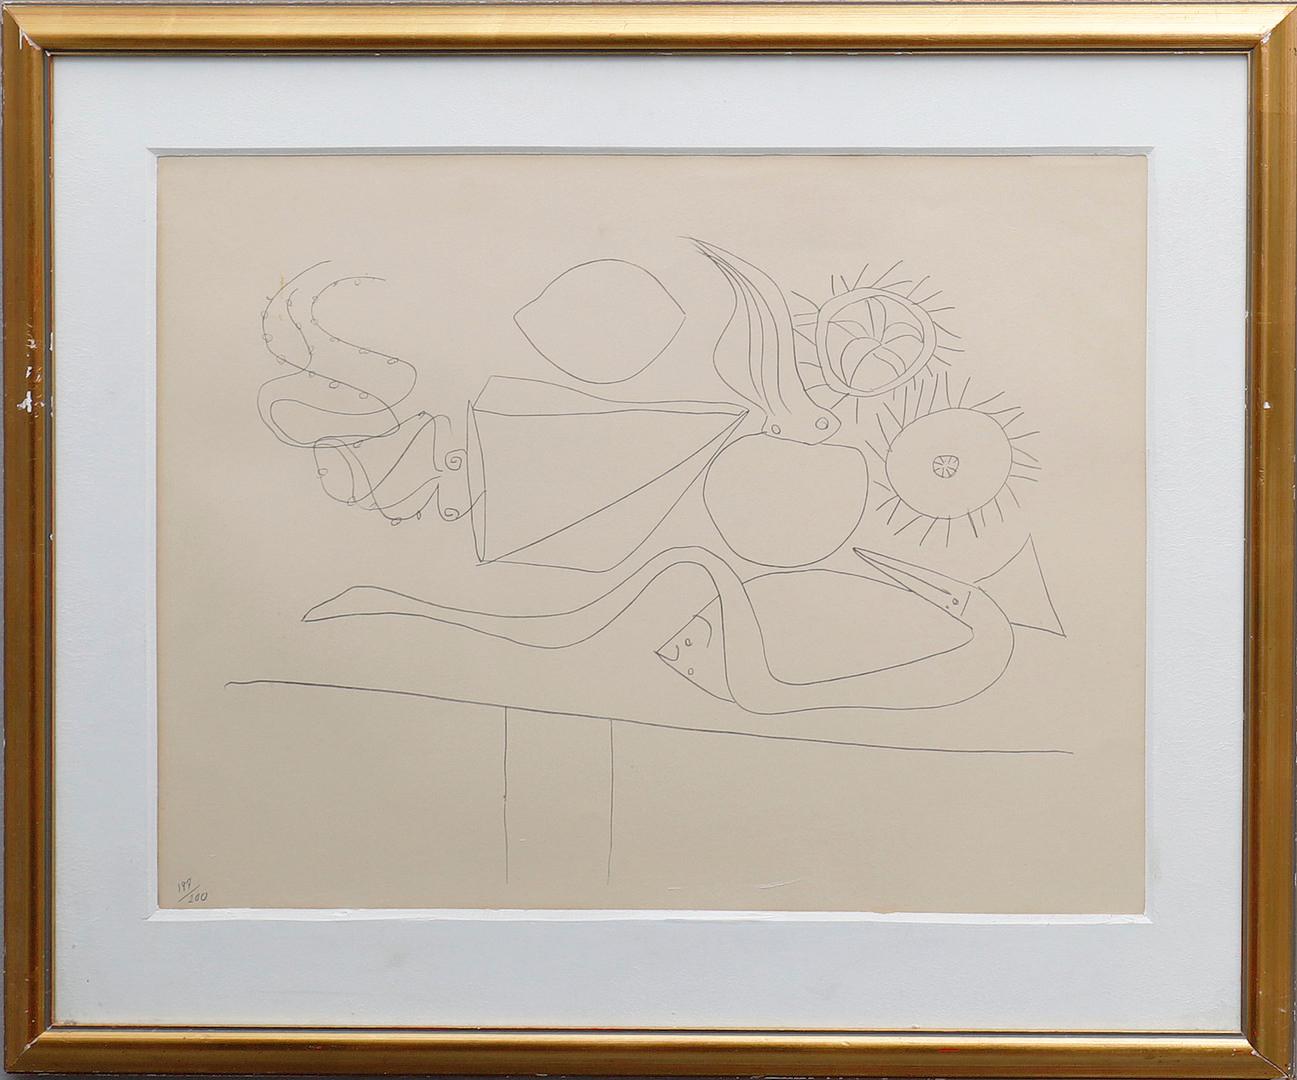 PABLO PICASSO. Lithograph, from 